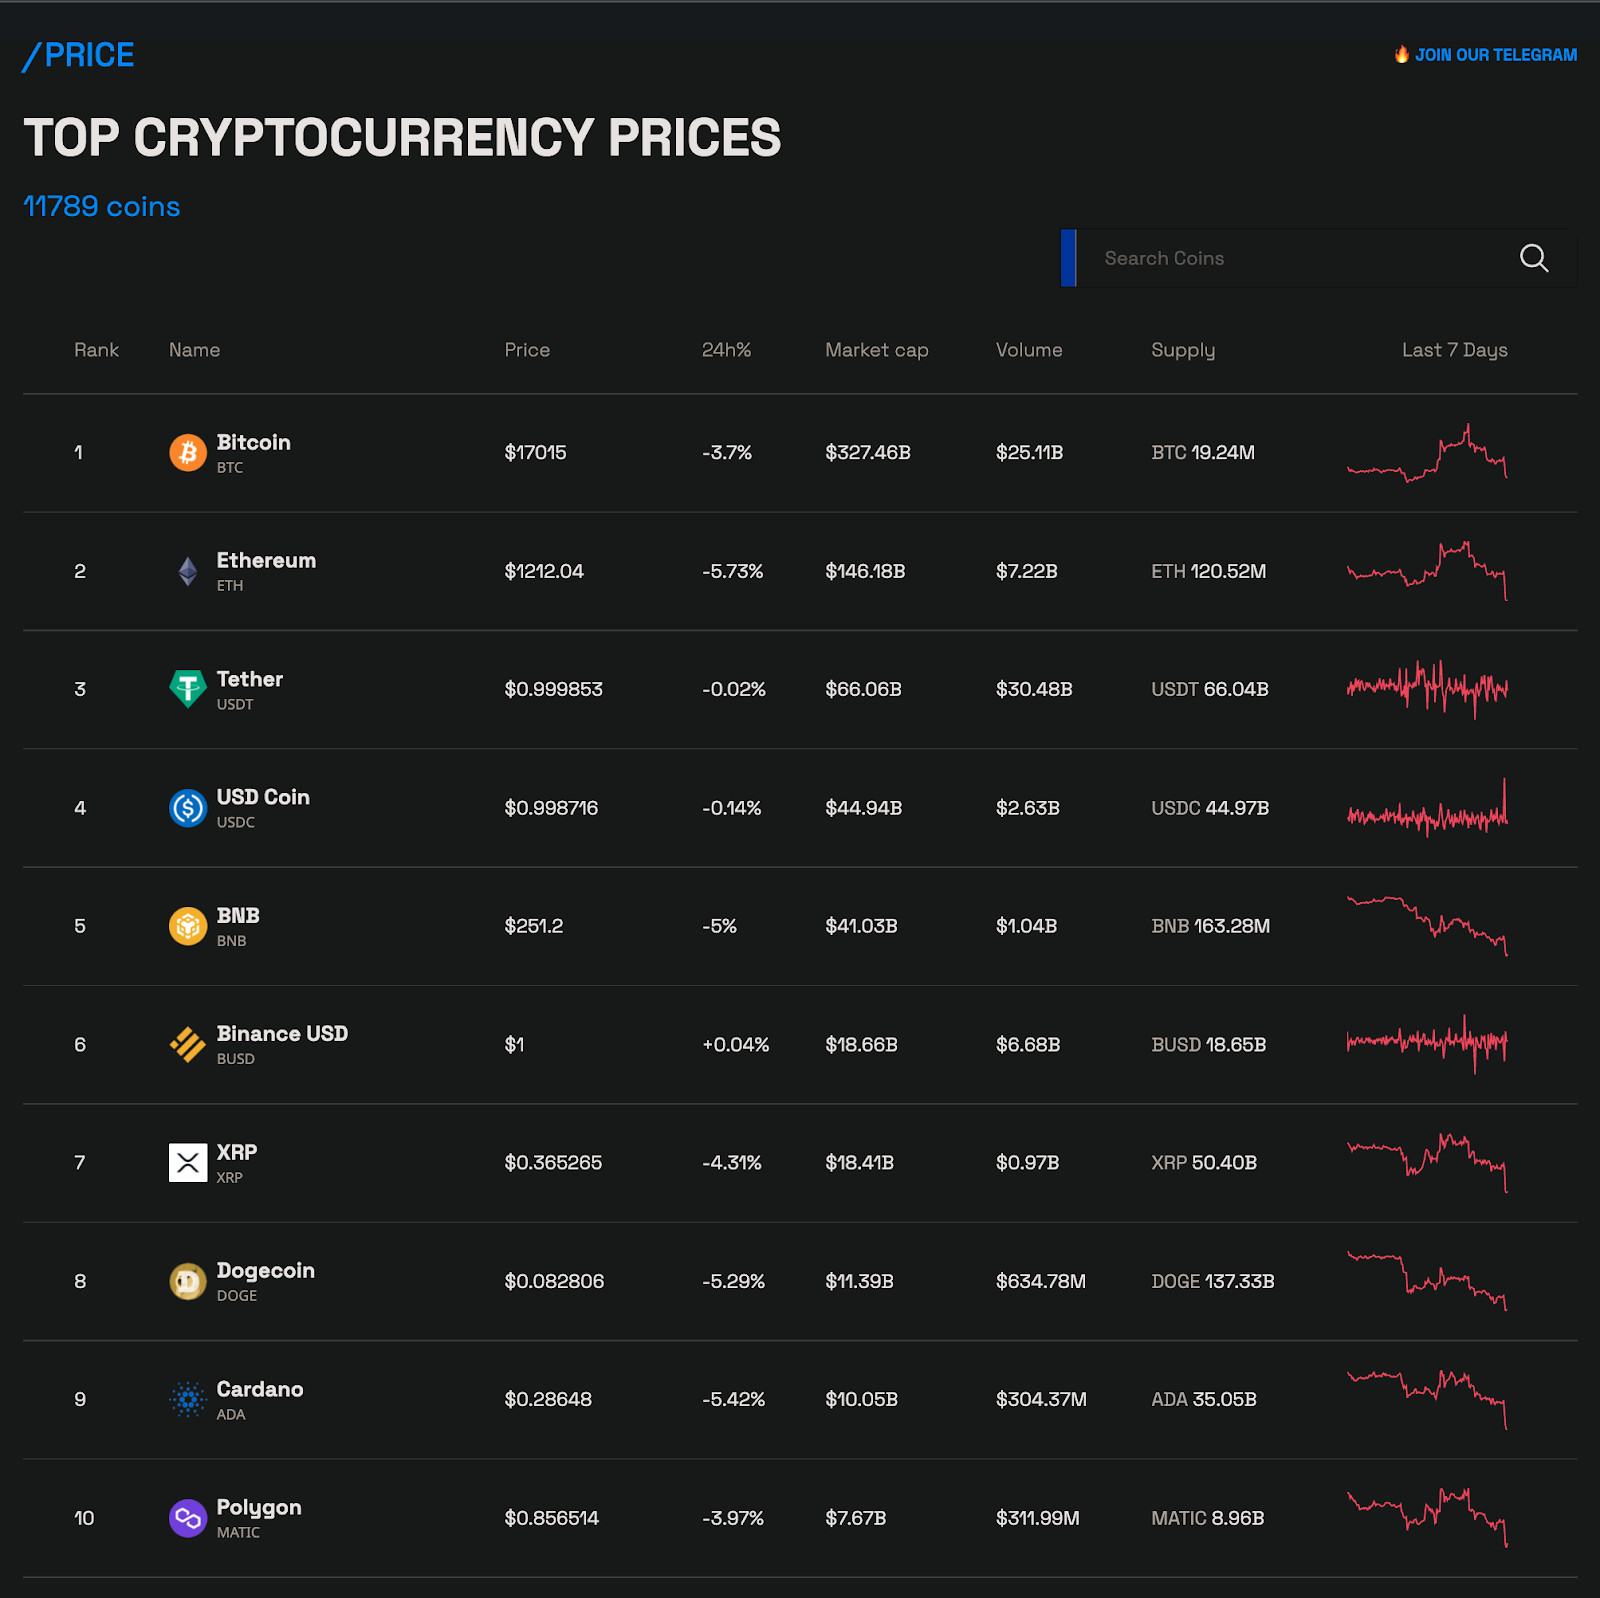 Top Cryptocurrency Prices